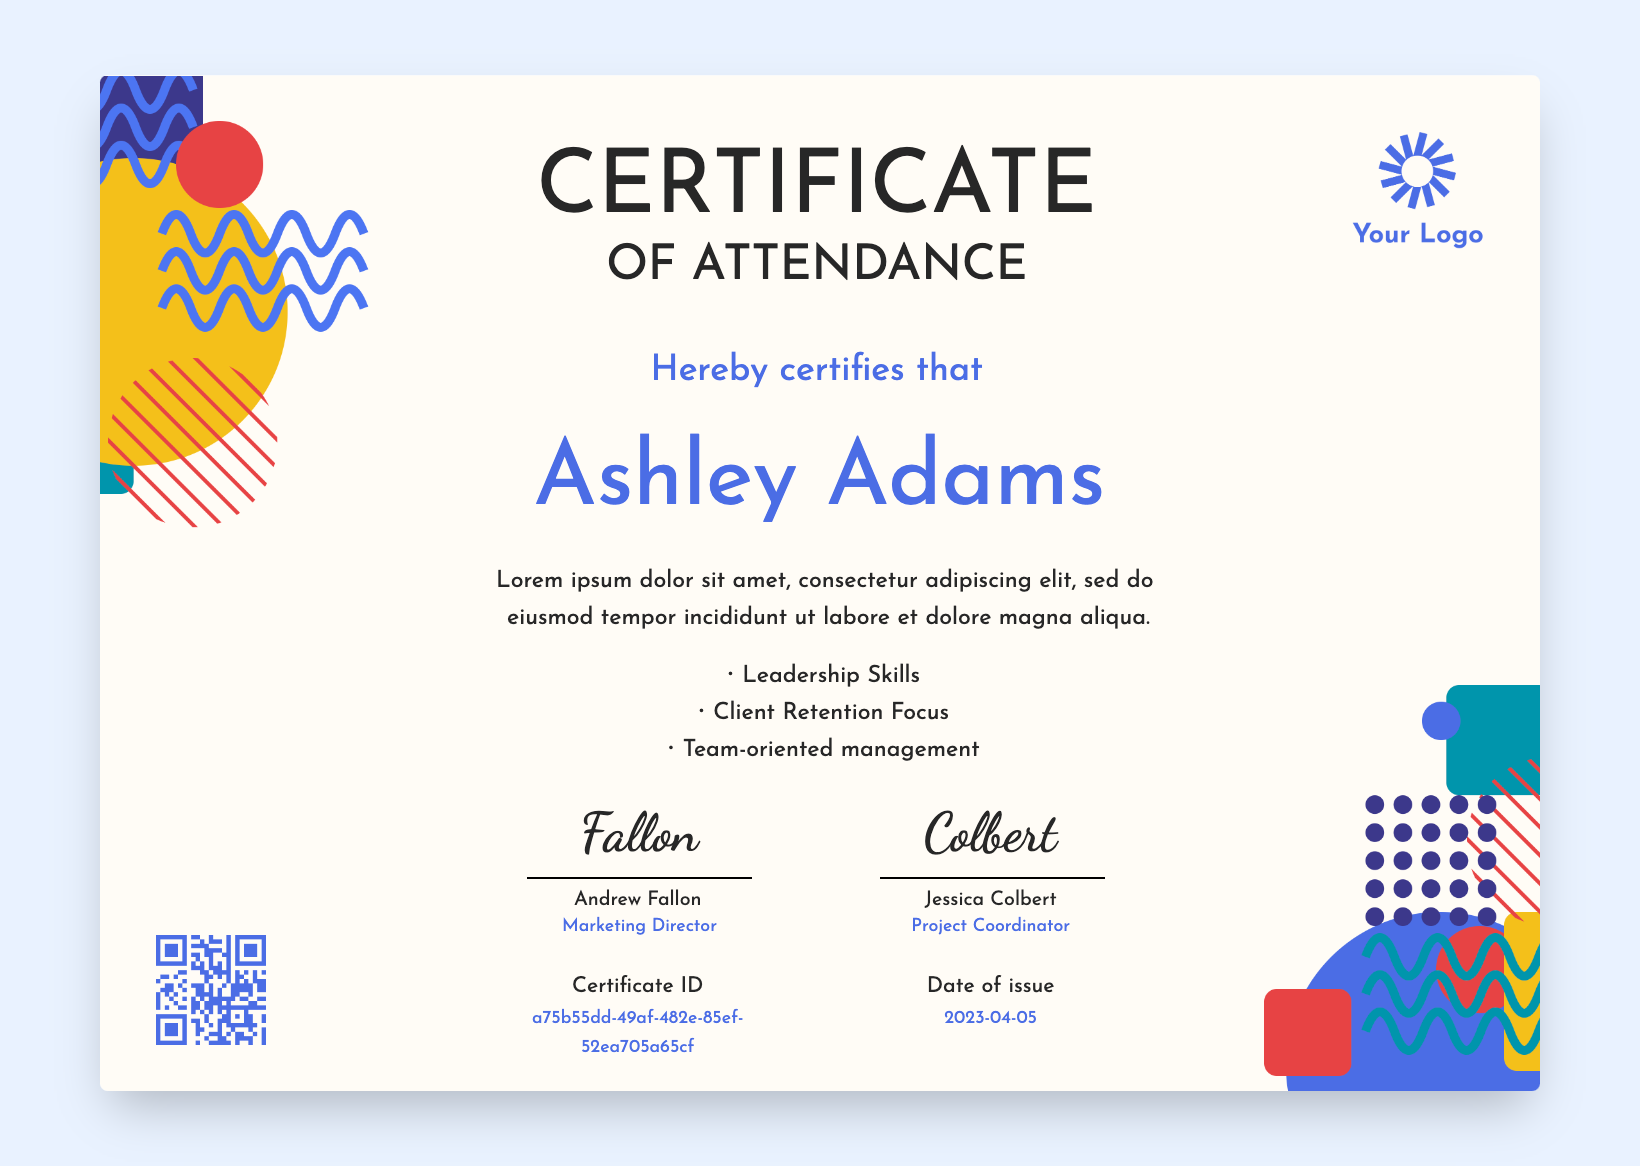 Colorful certificate of attendance with abstract elements.